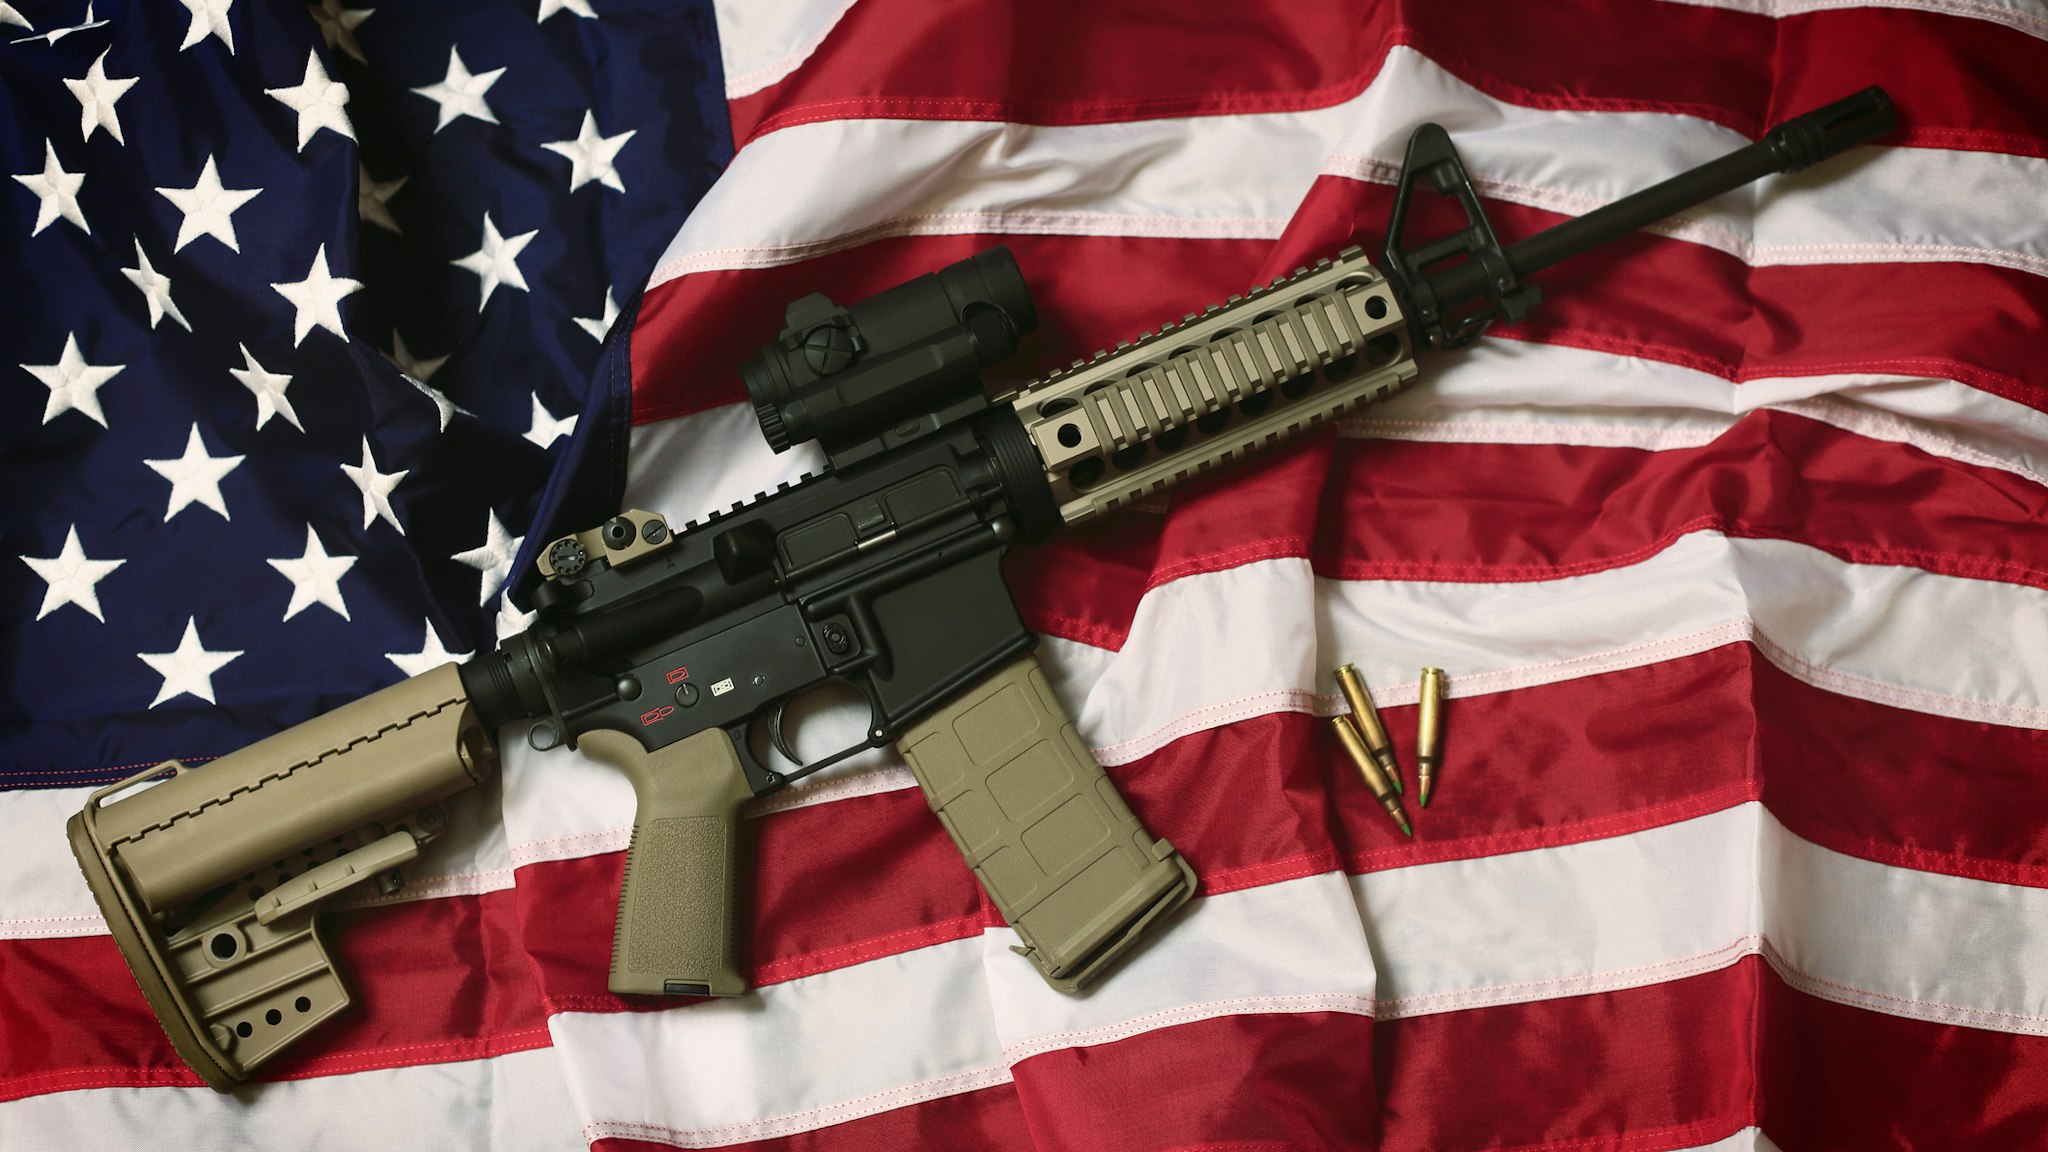 An AR-15 rifle with bullets on an American flag, a symbol of the right of patriotic Americans to bear arms, guaranteed by the Second Amendment.